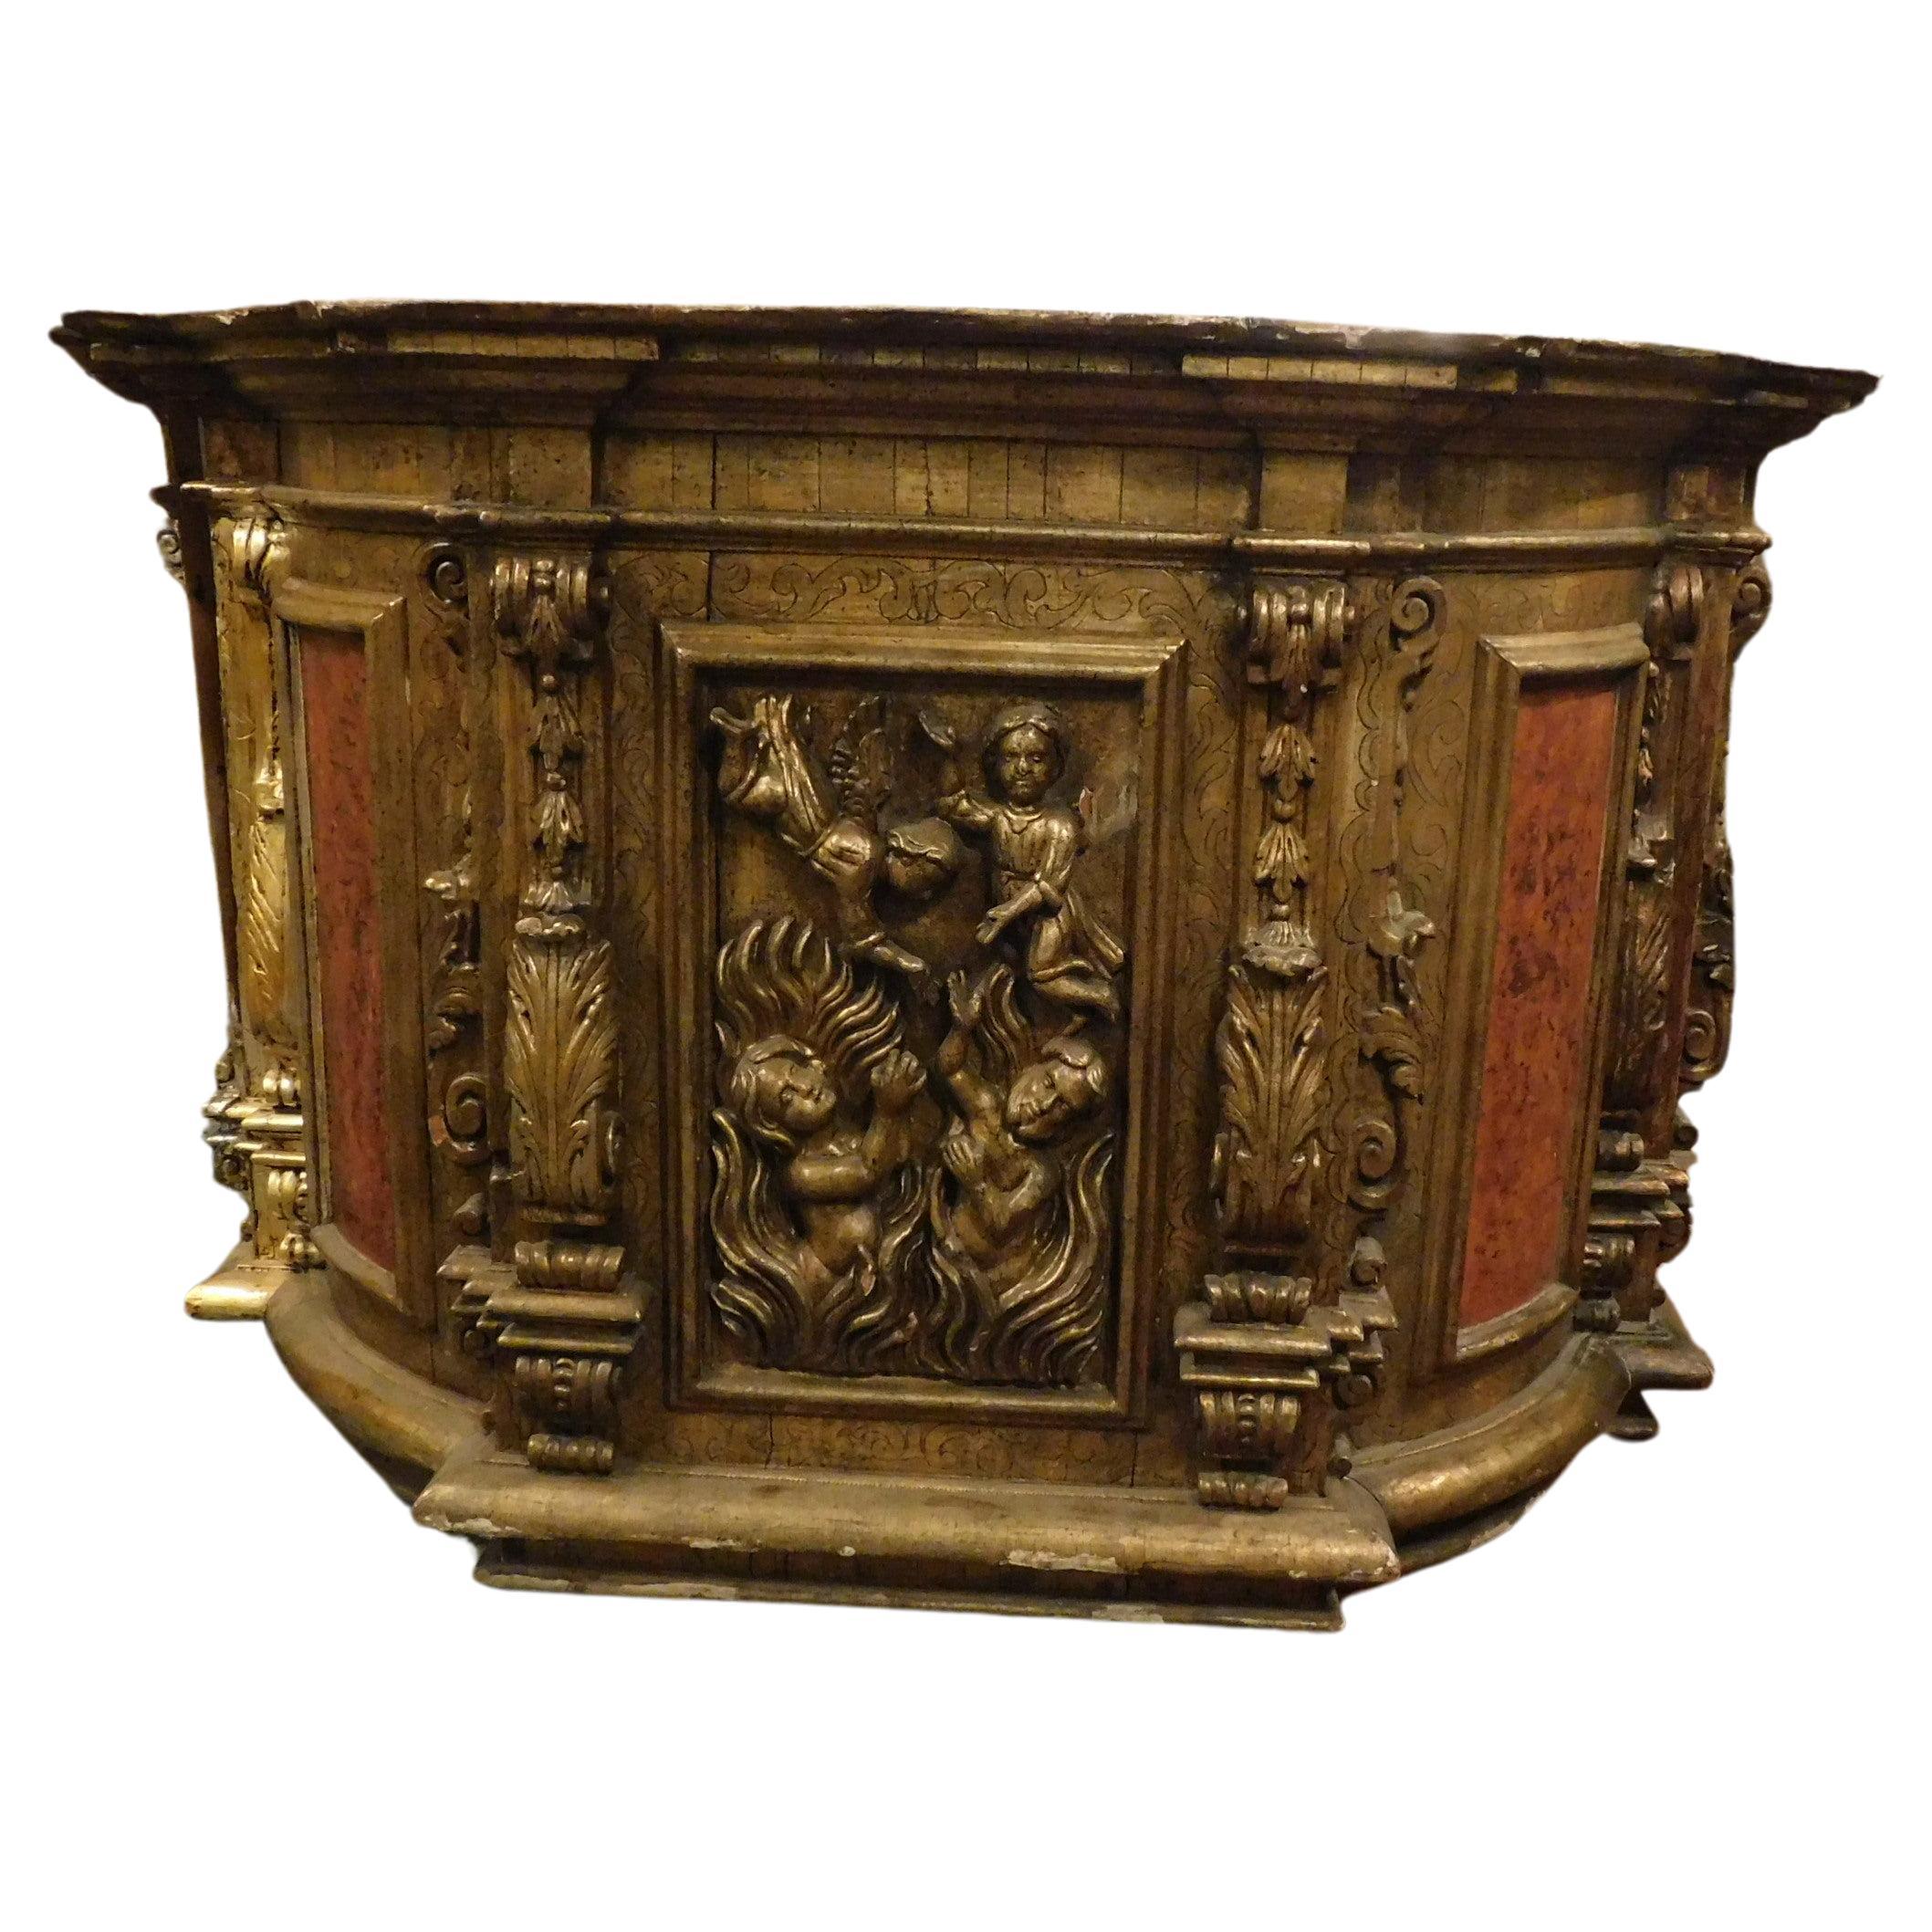 Antique Counter-Church Pulpit in Gilded Richly Carved Wood, 16th Century Italy